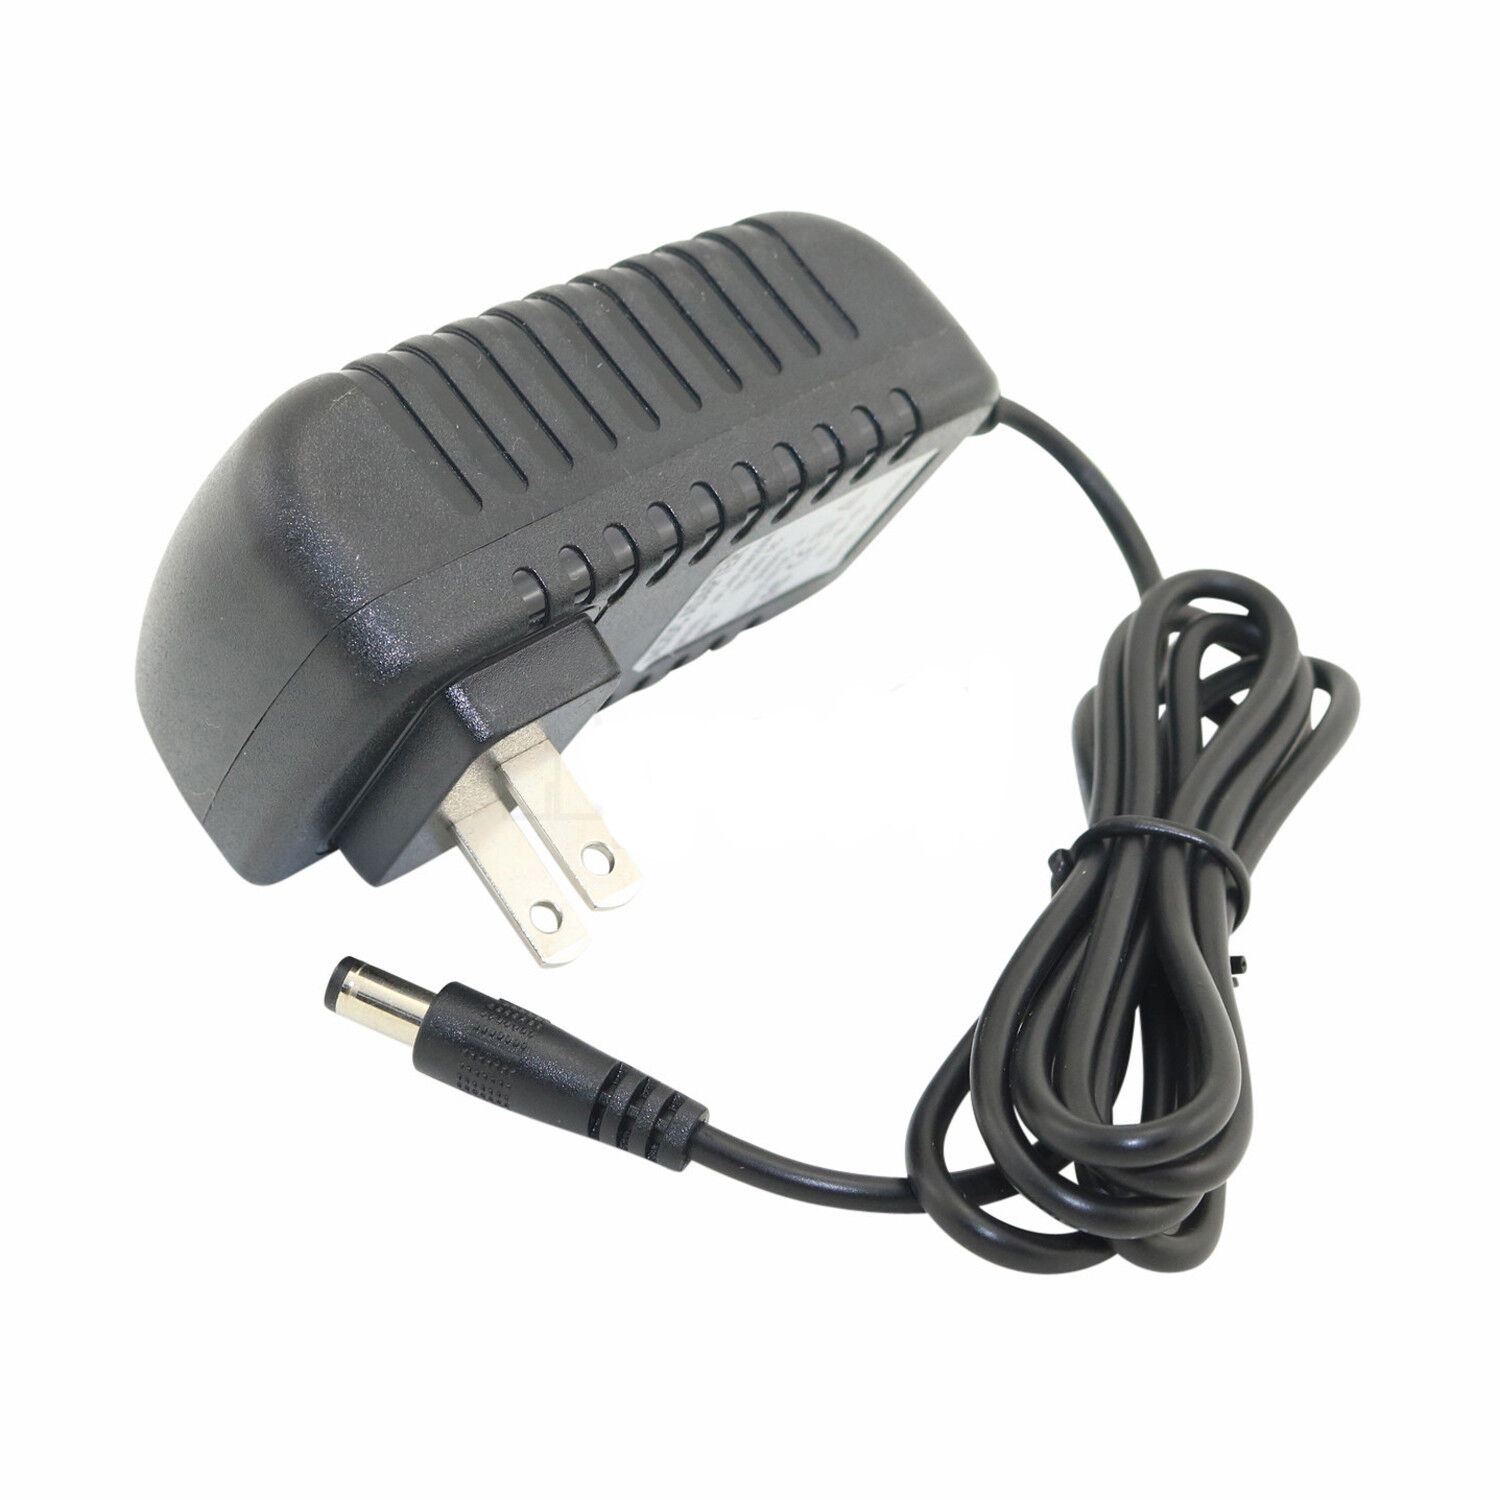 AC Adapter For Creative Sound Blaster X7 & Limited Edition High-Resolution USB D Compatible Brand For Creative Sound Bl